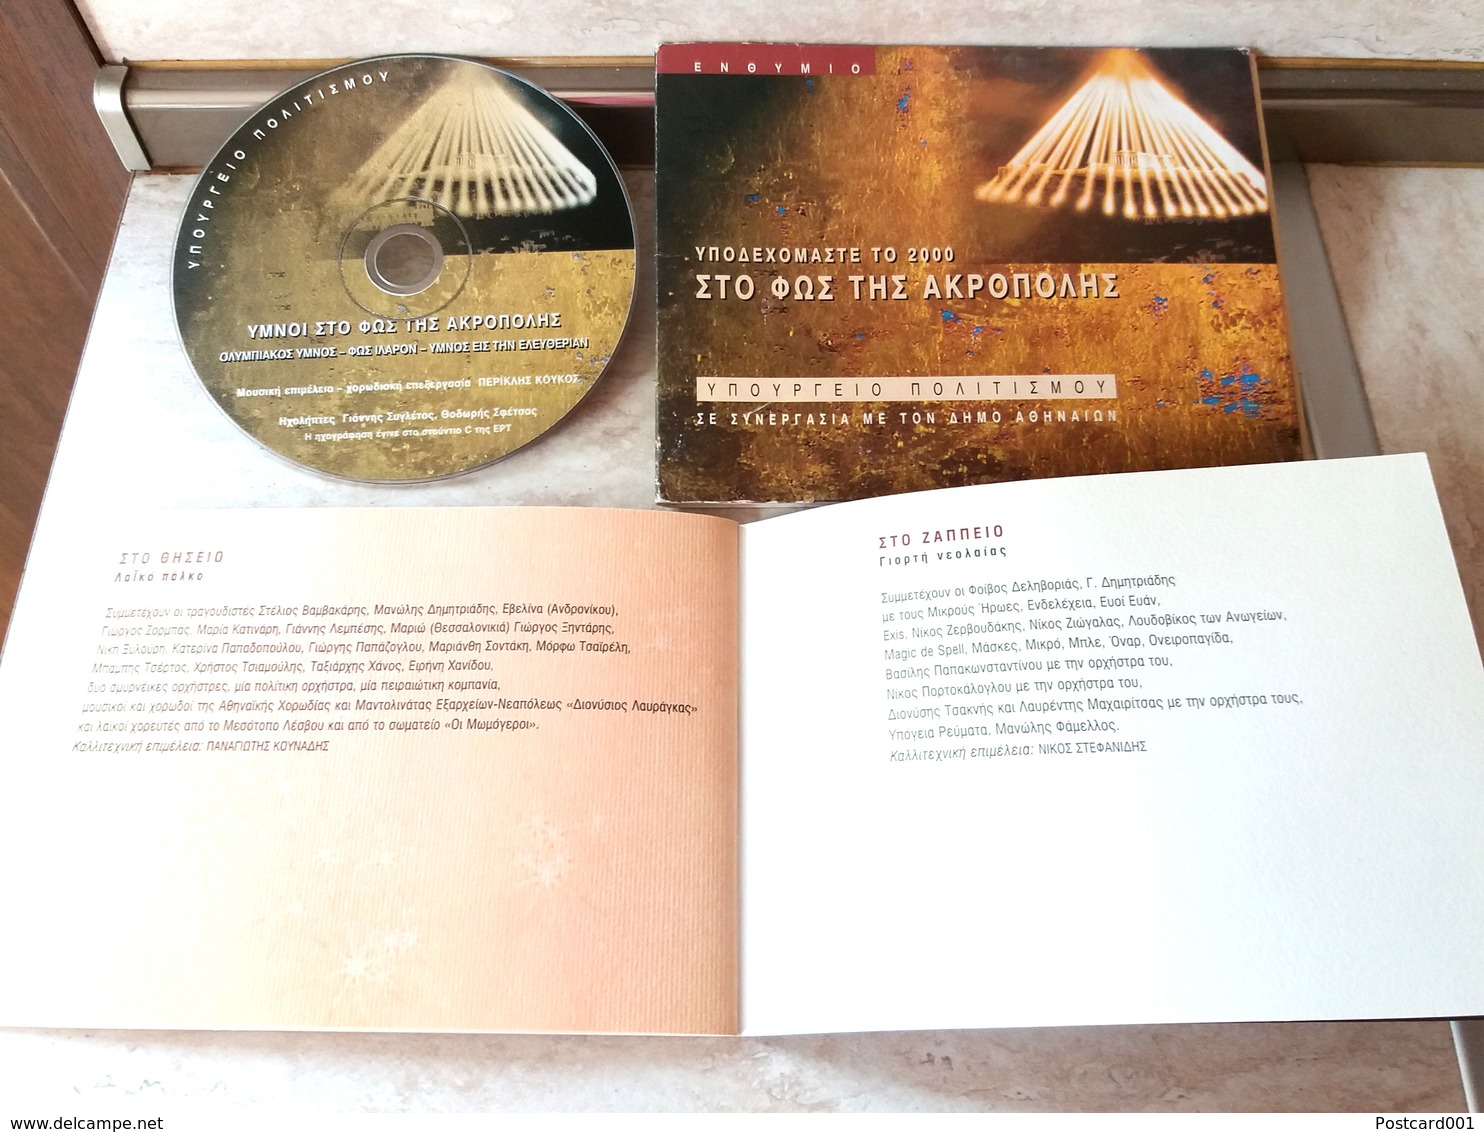 ACROPOLE IN LIGHT AND MUSIC - DVD AND BOOK WITH TEXTS OF GREEK SONGS (2) - Music On DVD